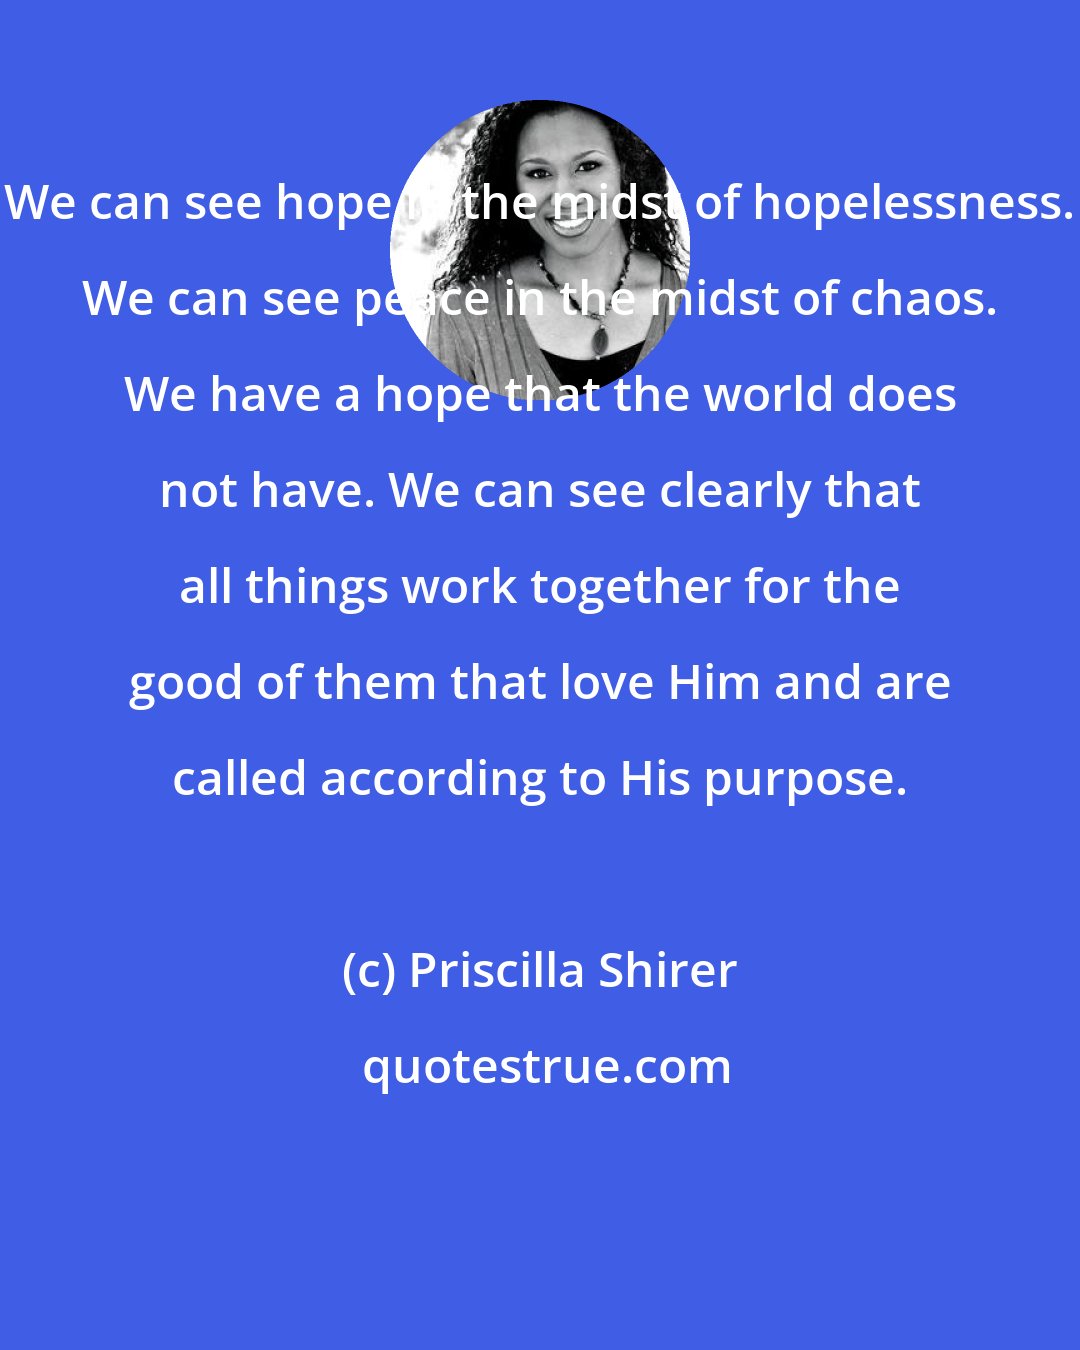 Priscilla Shirer: We can see hope in the midst of hopelessness. We can see peace in the midst of chaos. We have a hope that the world does not have. We can see clearly that all things work together for the good of them that love Him and are called according to His purpose.